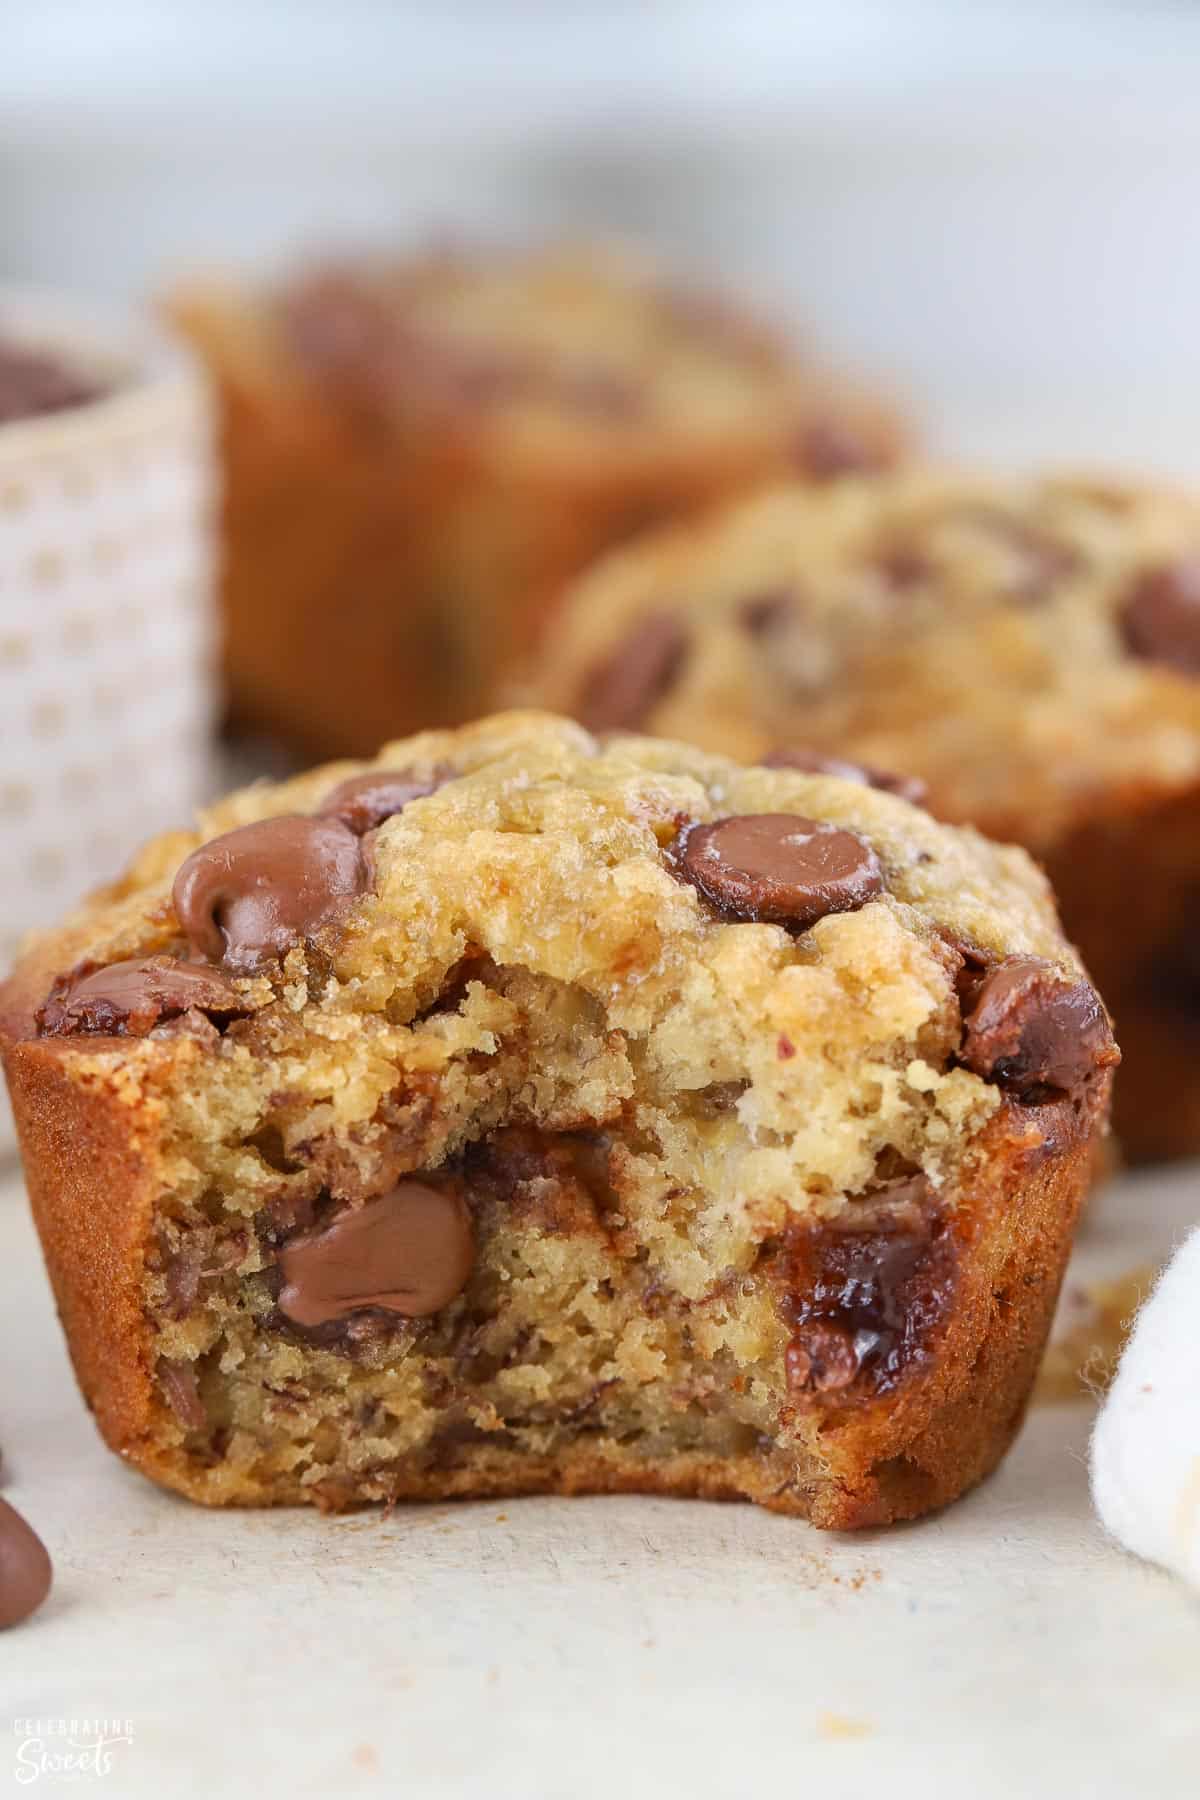 Close up of Banana Chocolate Chip Muffin with a bite taken out of it